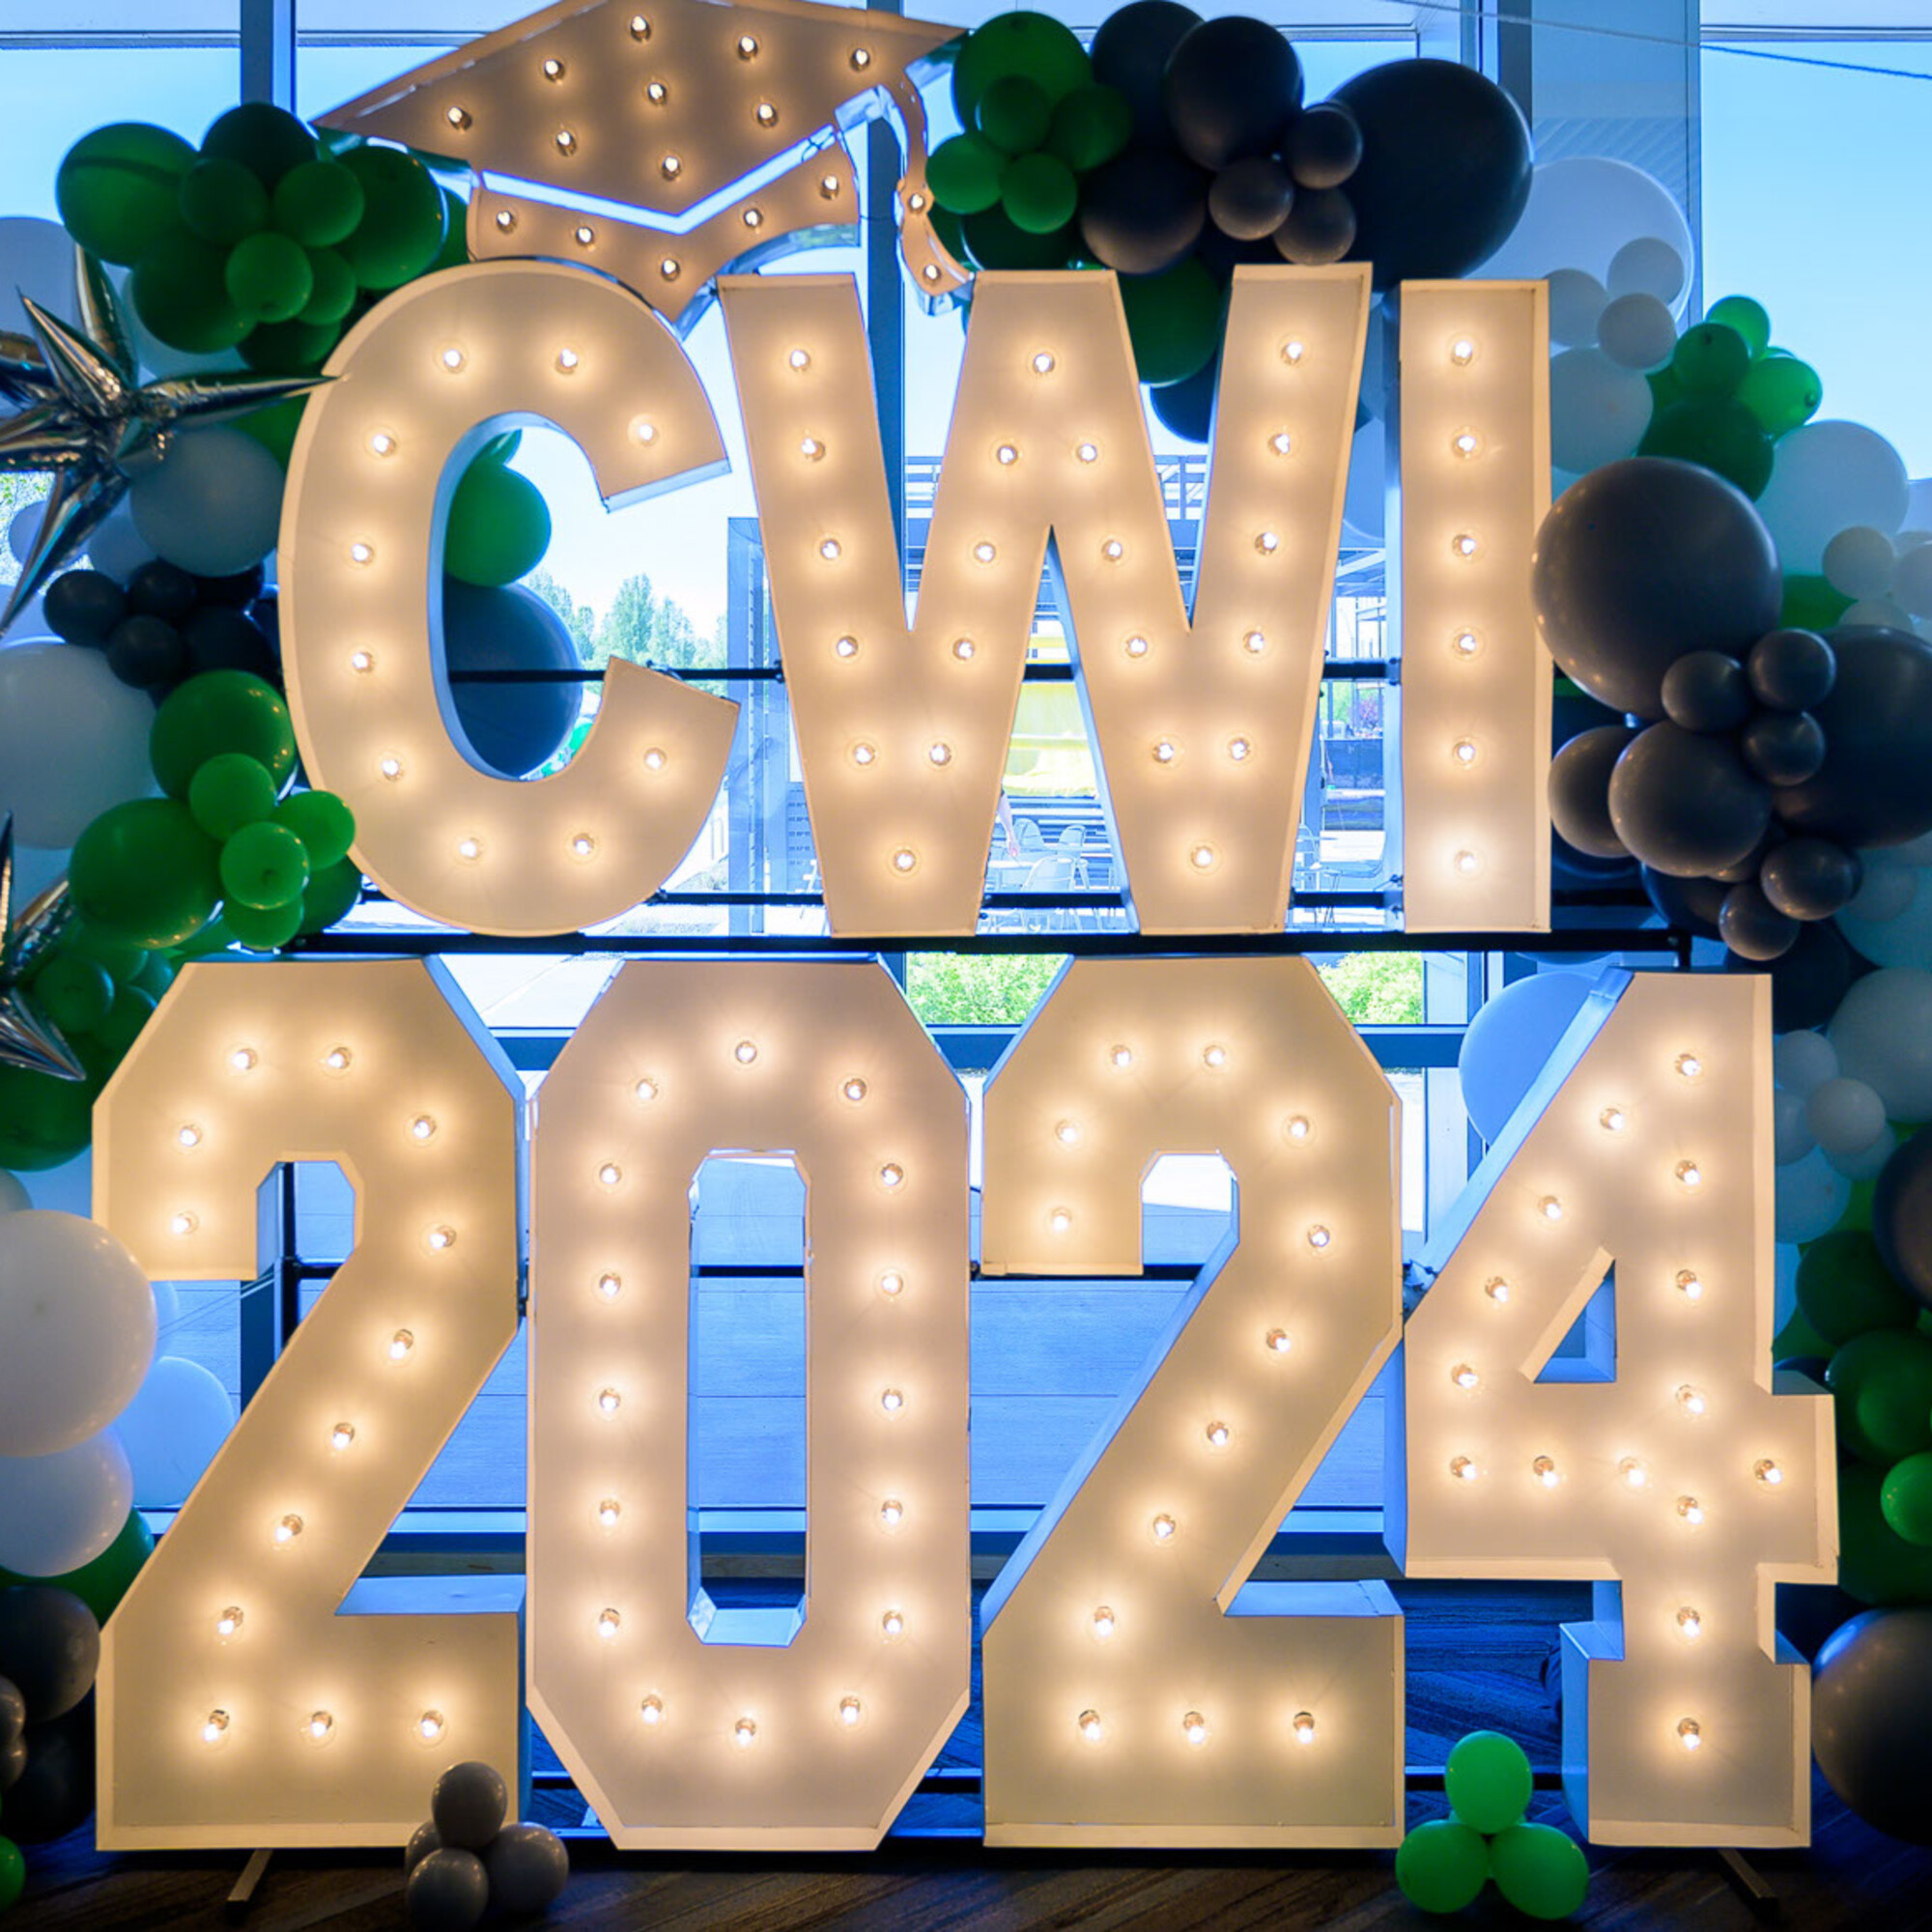 A display is pictured, comprised of large letters that say "CWI 2024" and are surrounded by balloons.